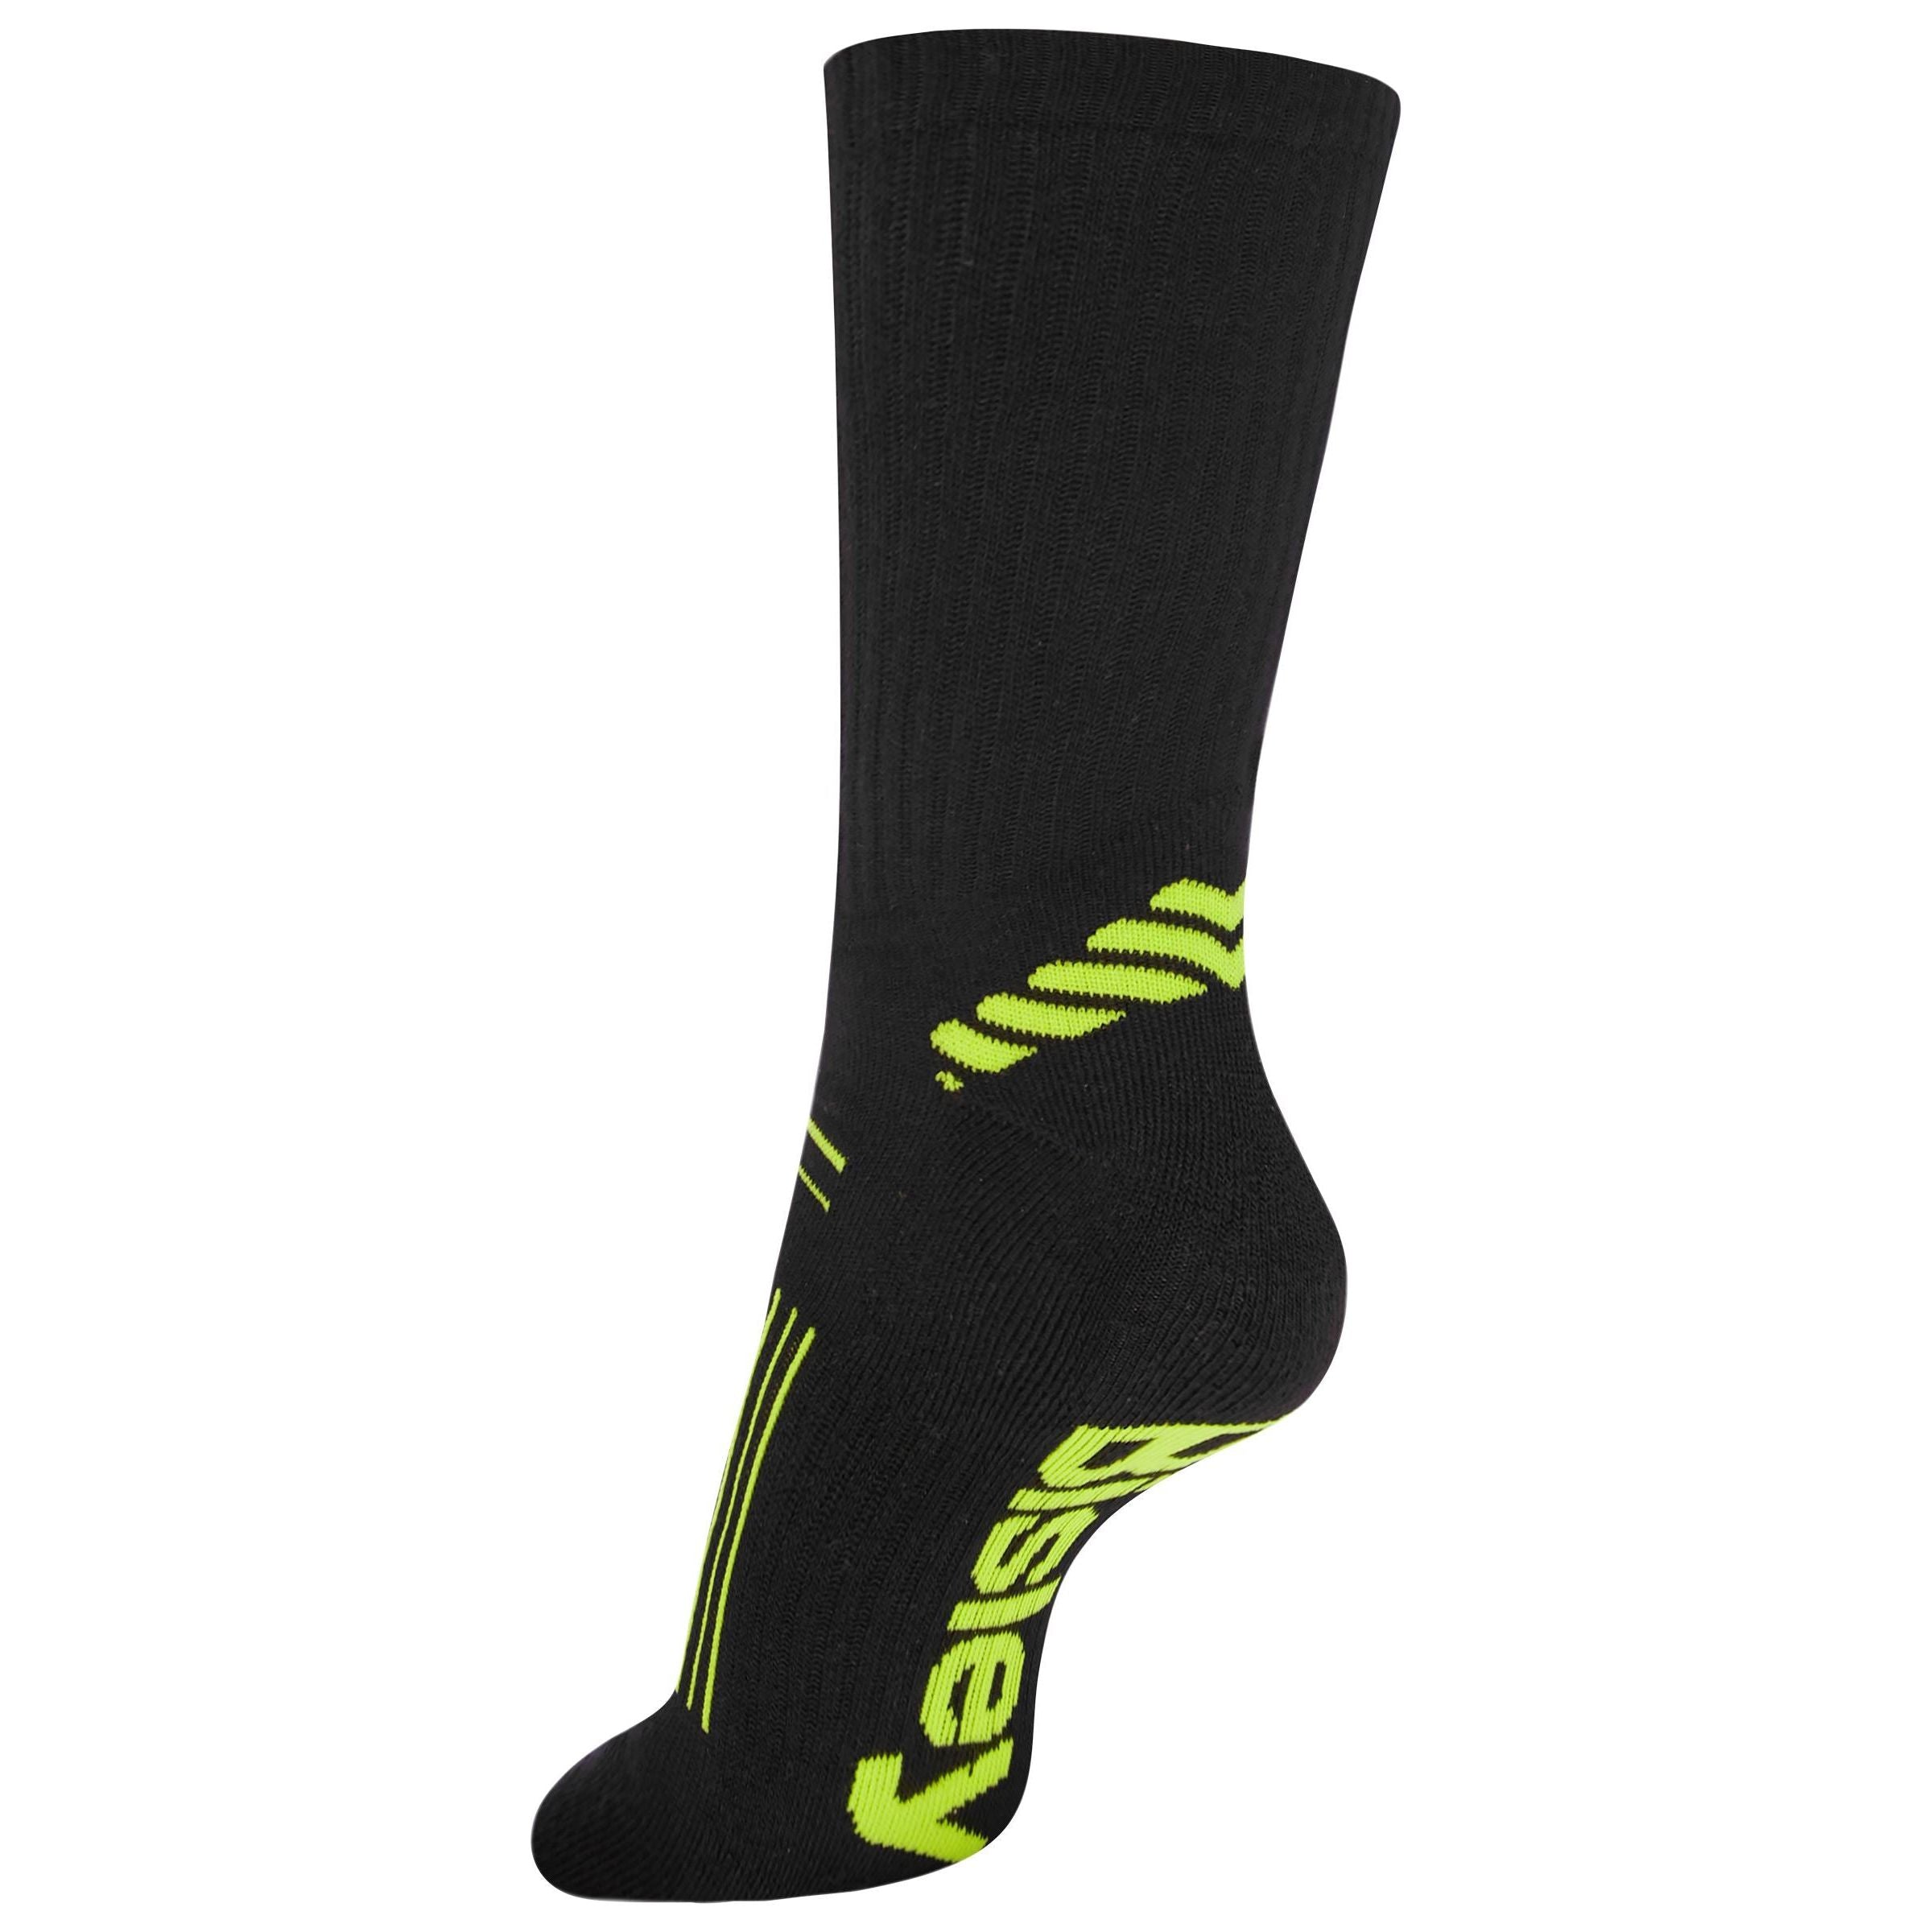 Recycle Repreve Work Socks (3X Pack) - BSX7025